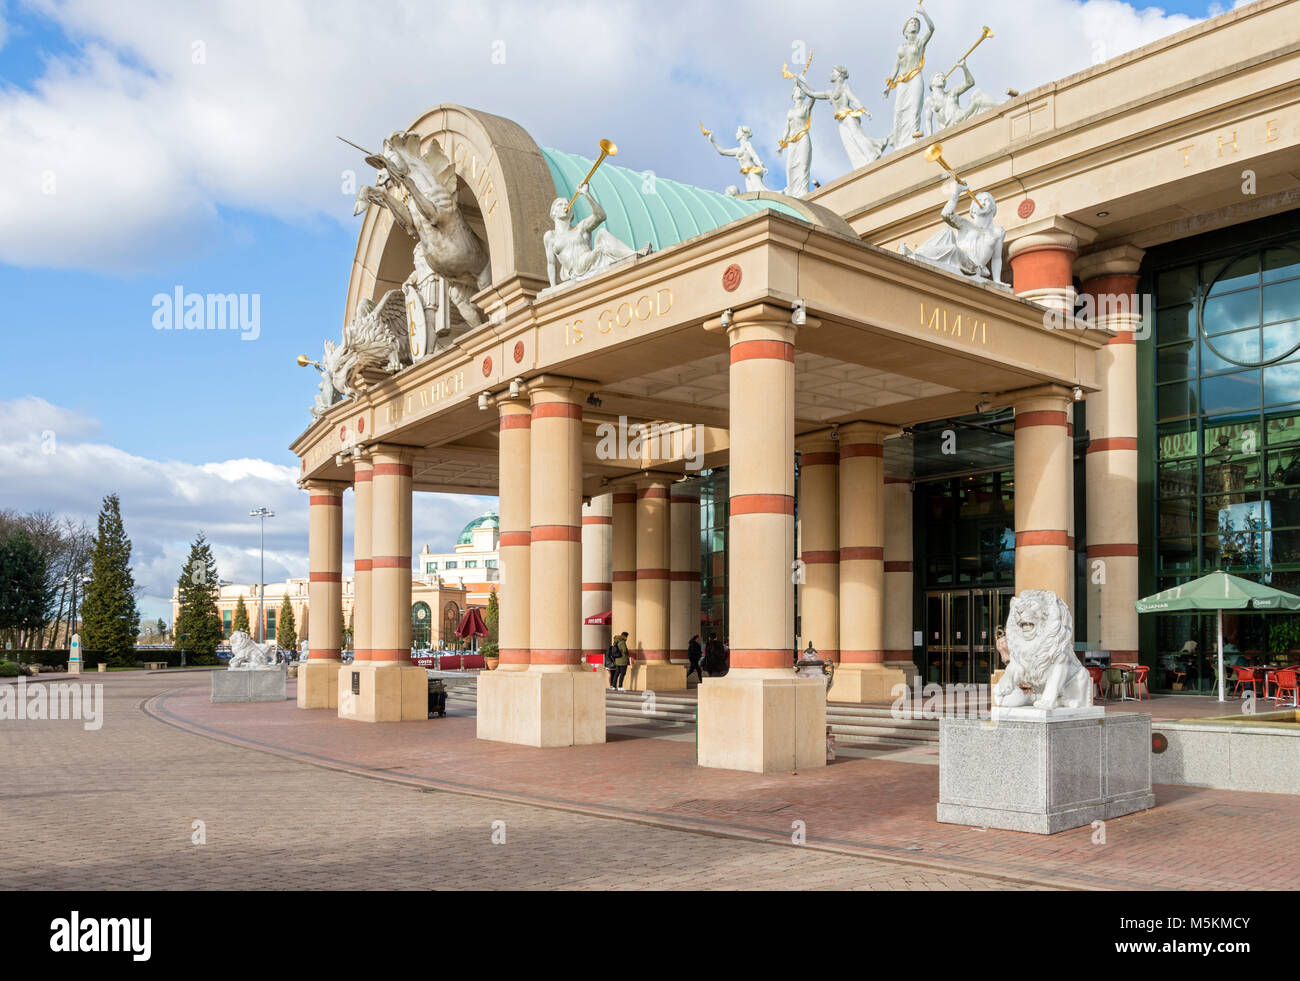 Entrance to the intu Trafford Centre, Manchester, UK Stock Photo